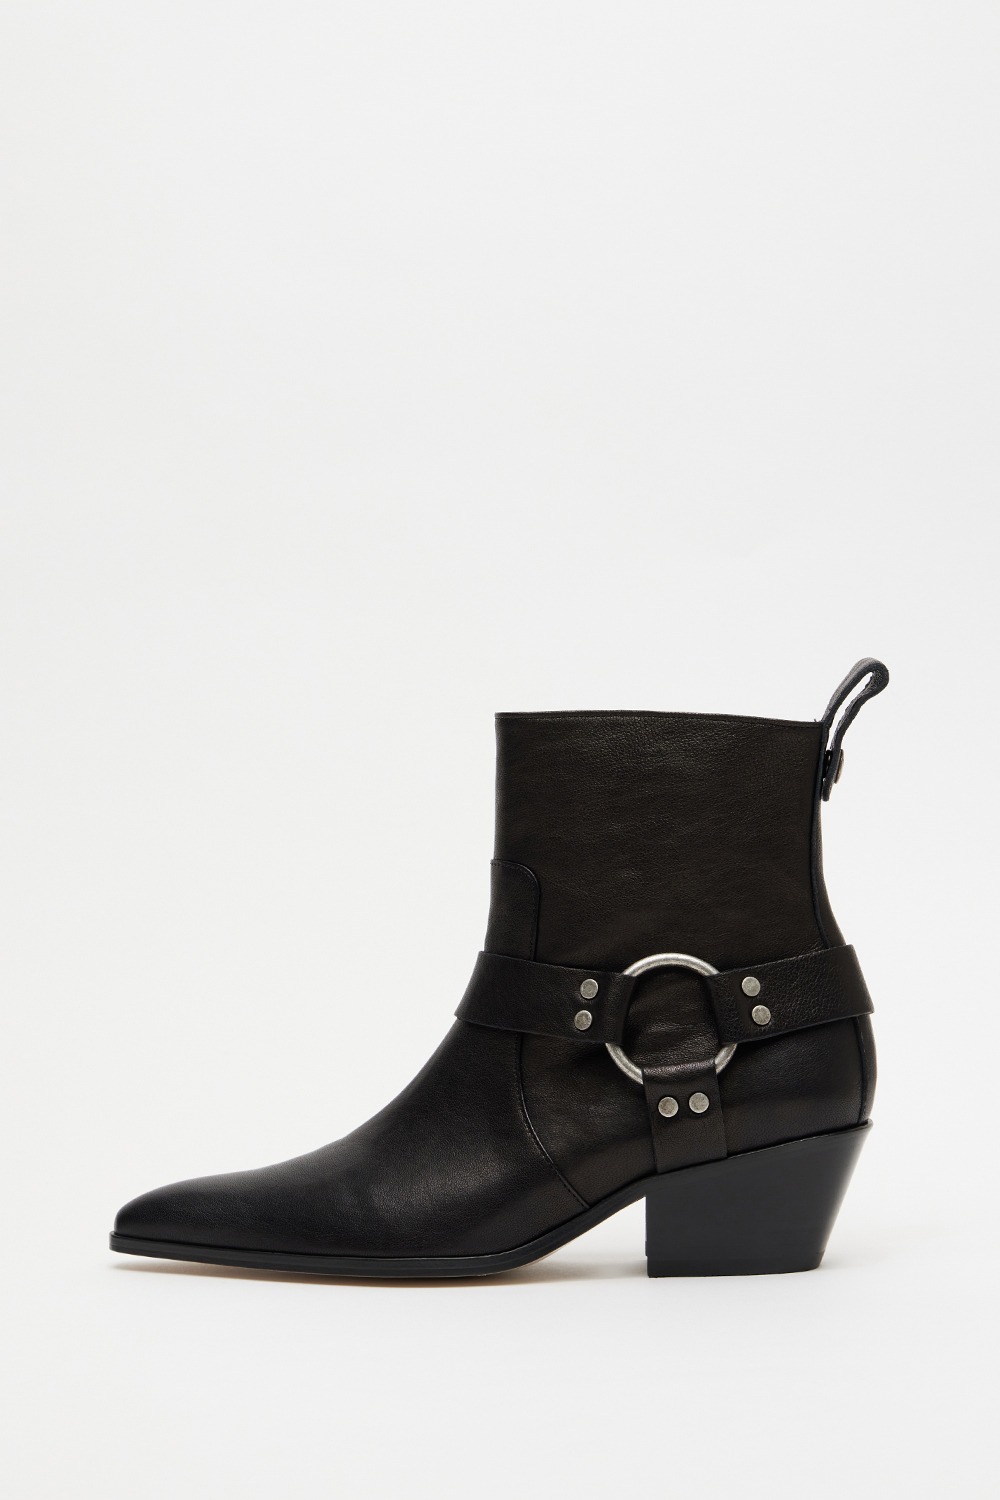 Buckle Western Boots - Black